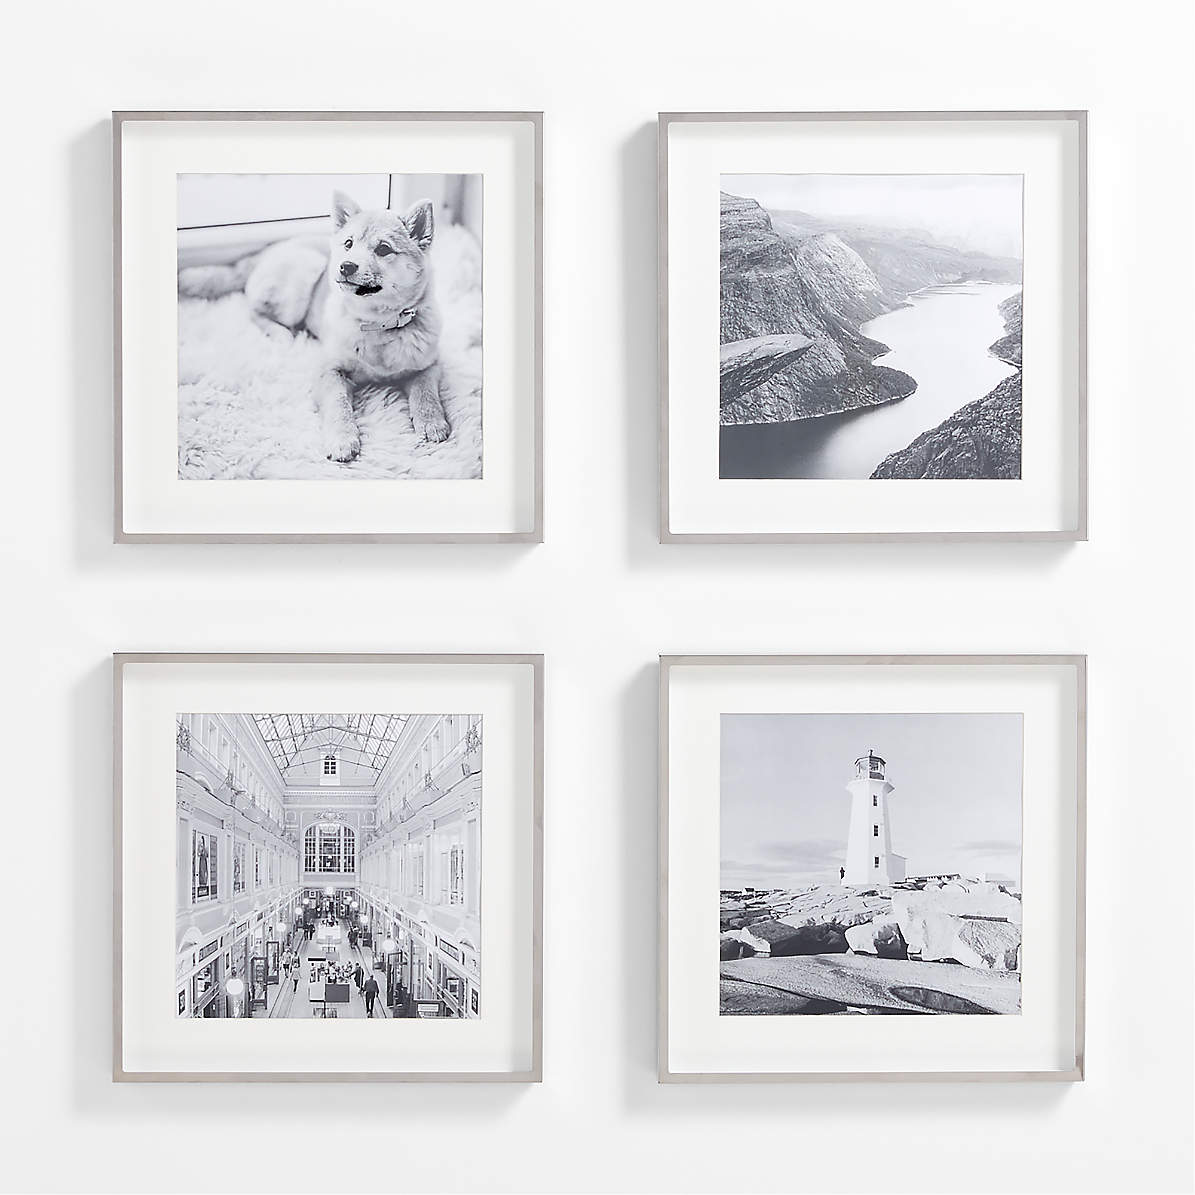 Bless international Picture Frame Set, 8 Pieces with Two 11x11